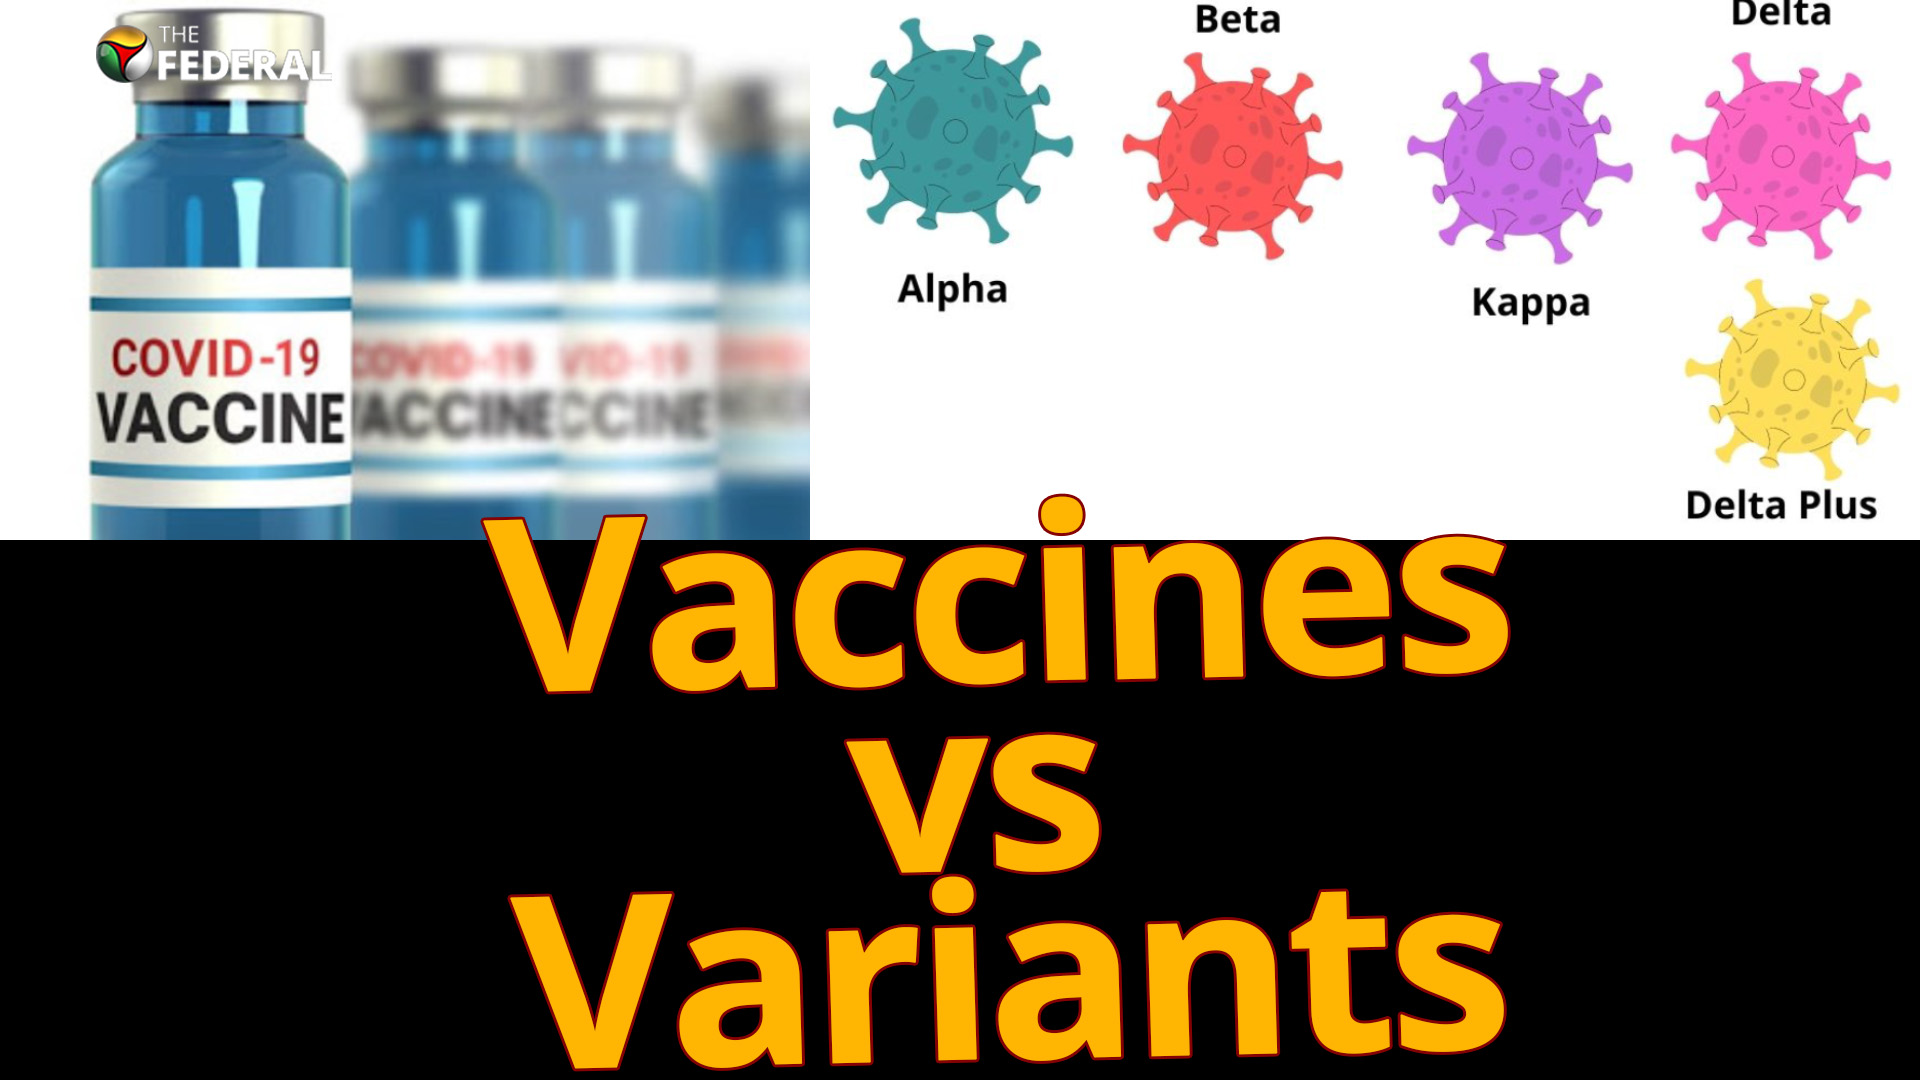 Explained: Can existing vaccines be upgraded to beat COVID-19 variants?